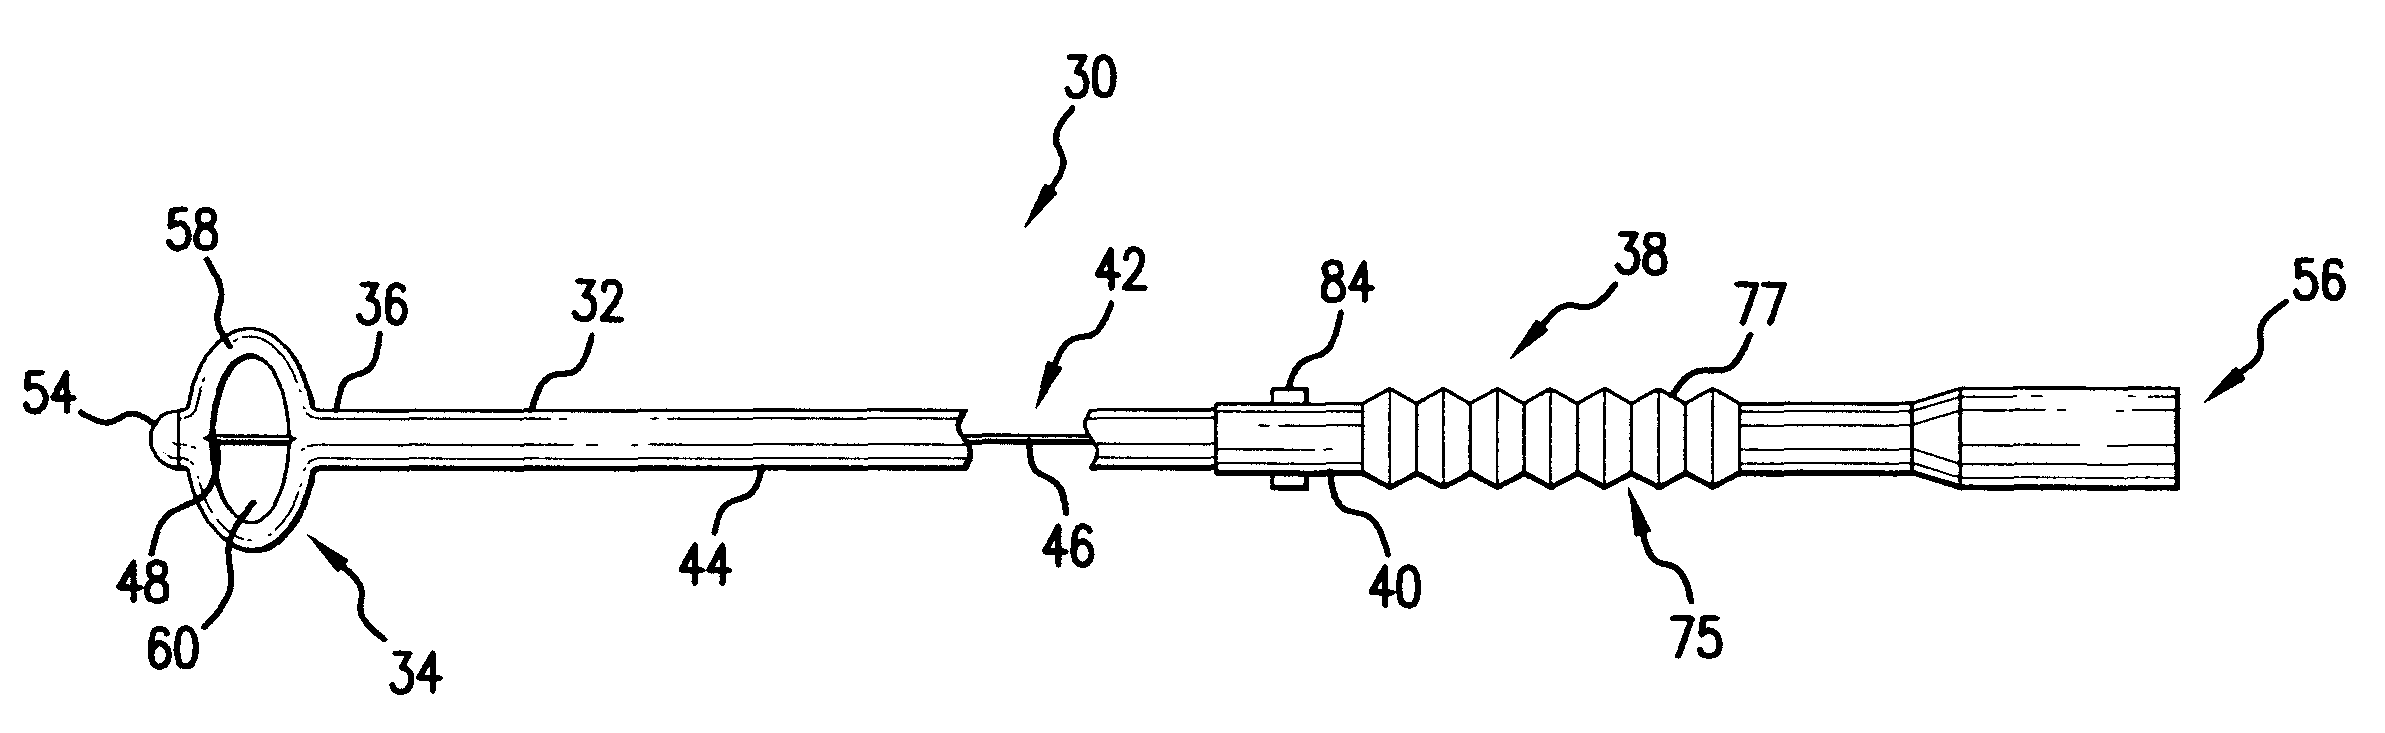 Indwelling urinary catheter with self-retaining mechanism